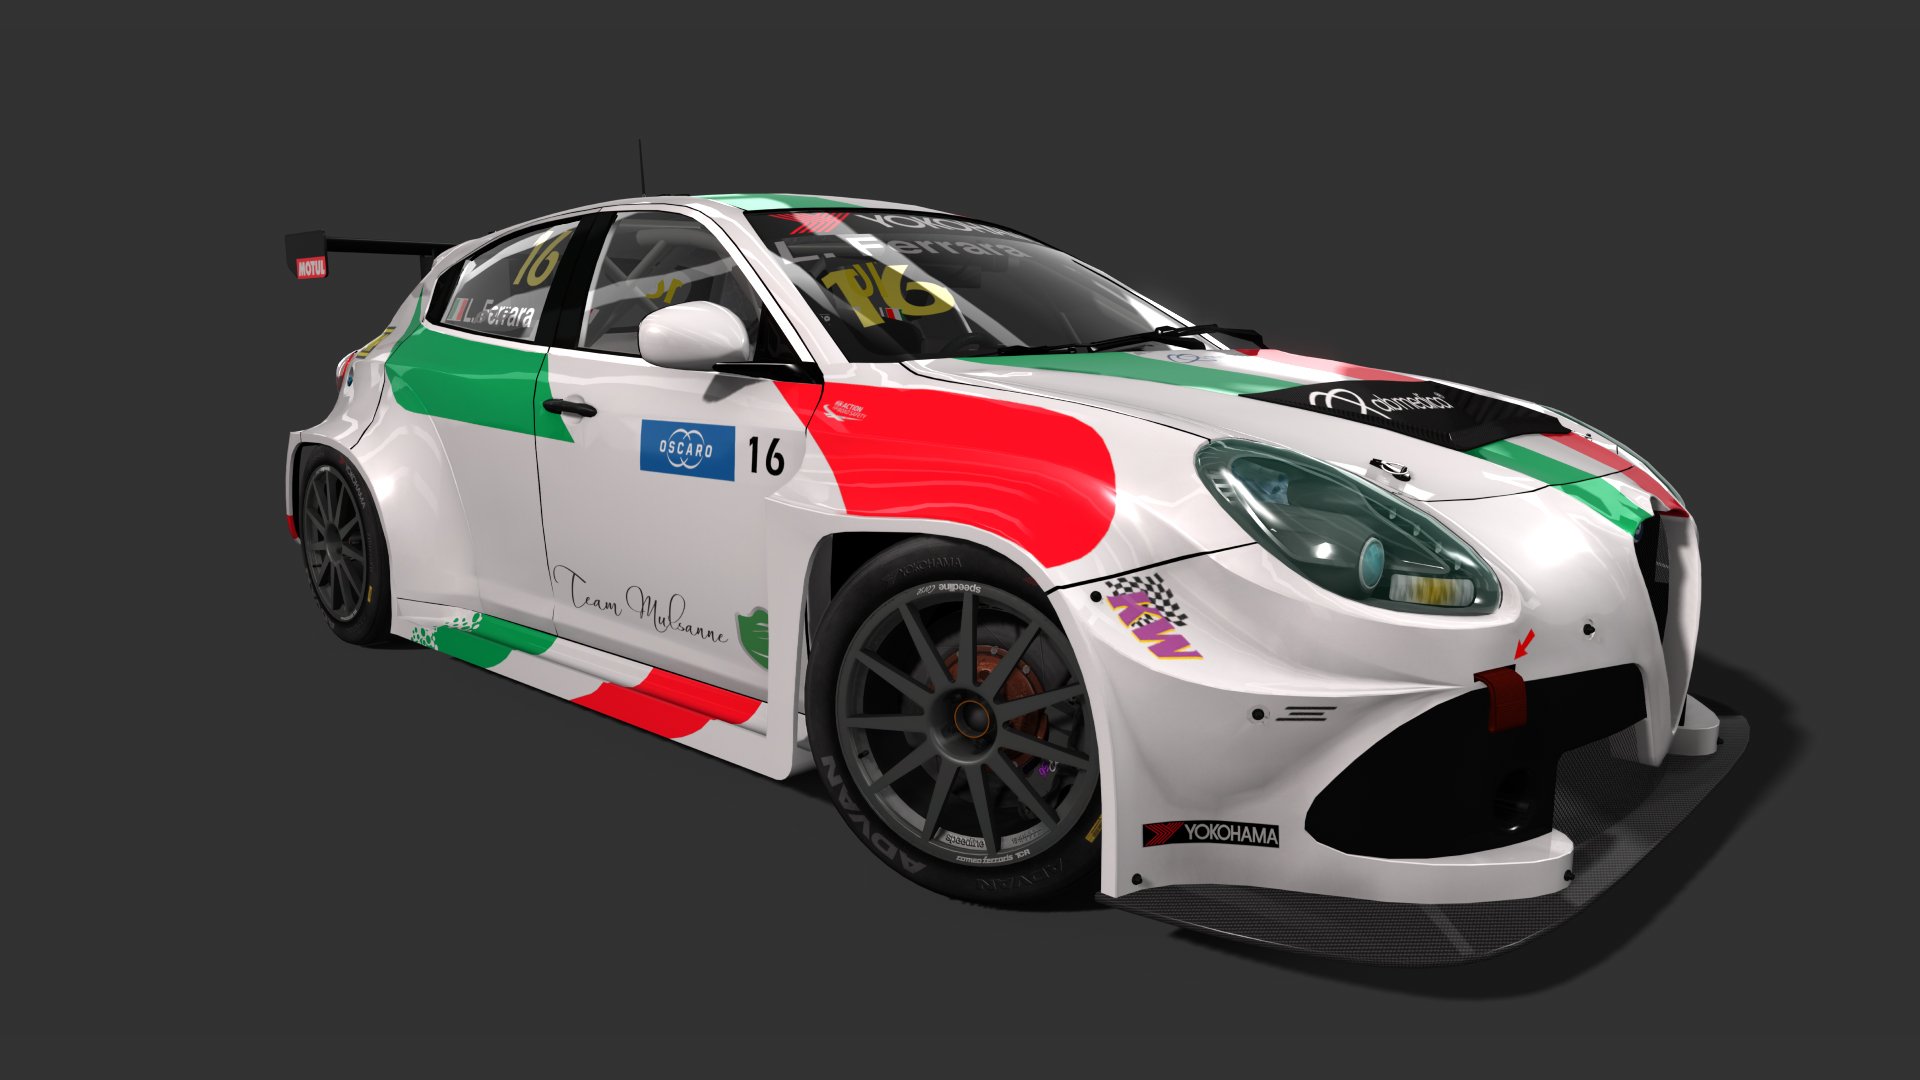 More information about "Assetto Corsa: WTCR 2018 Mod by Tommy78 disponibile"